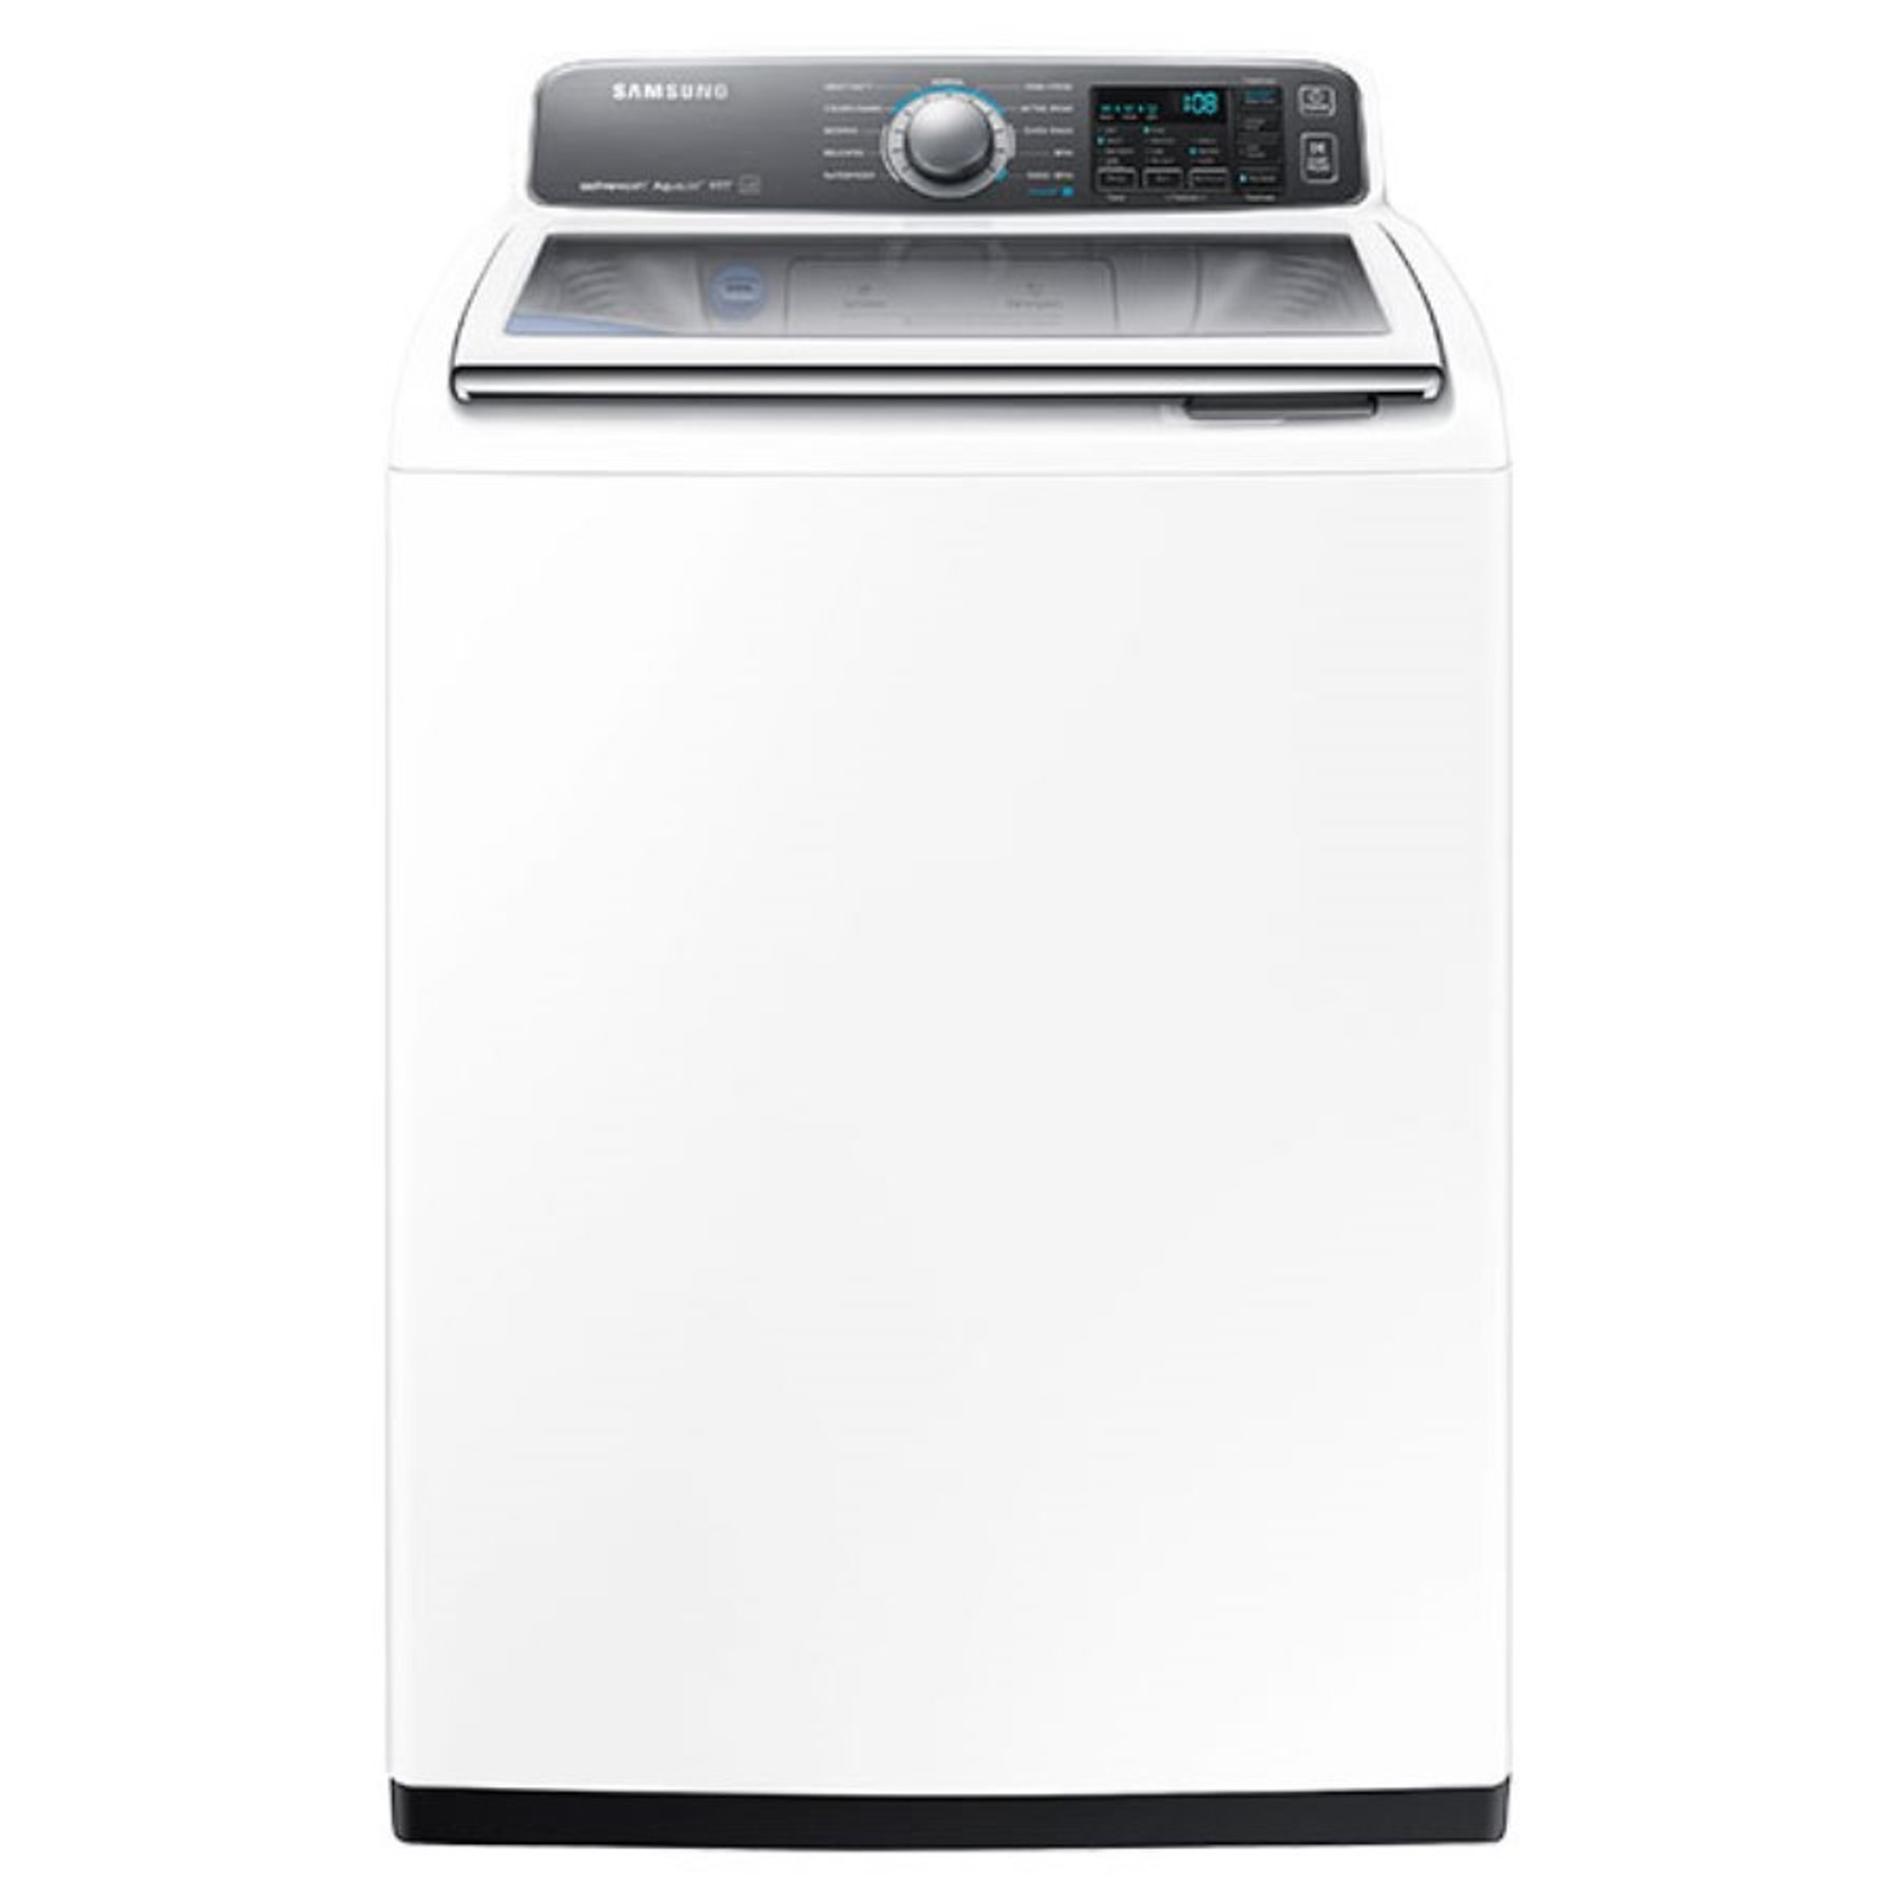 0887276095851 - SAMSUNG 4.8-CU FT HIGH-EFFICIENCY TOP-LOAD WASHER (WHITE) ENERGY STAR